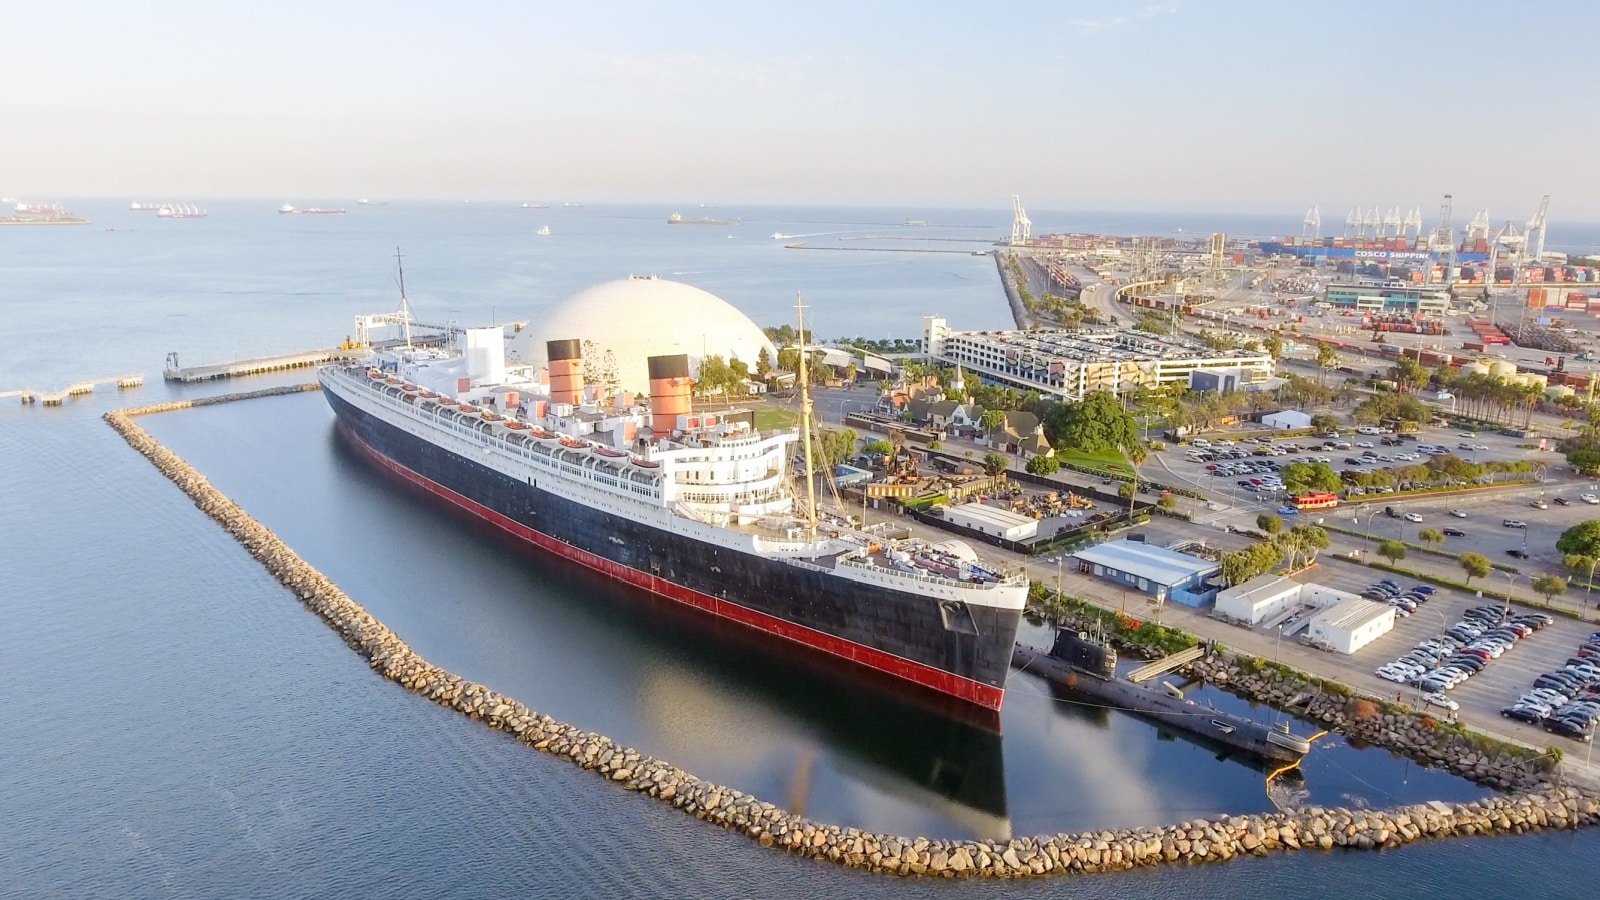 Aerial view of RMS Queen Mary ocean liner, Long Beach, CA.